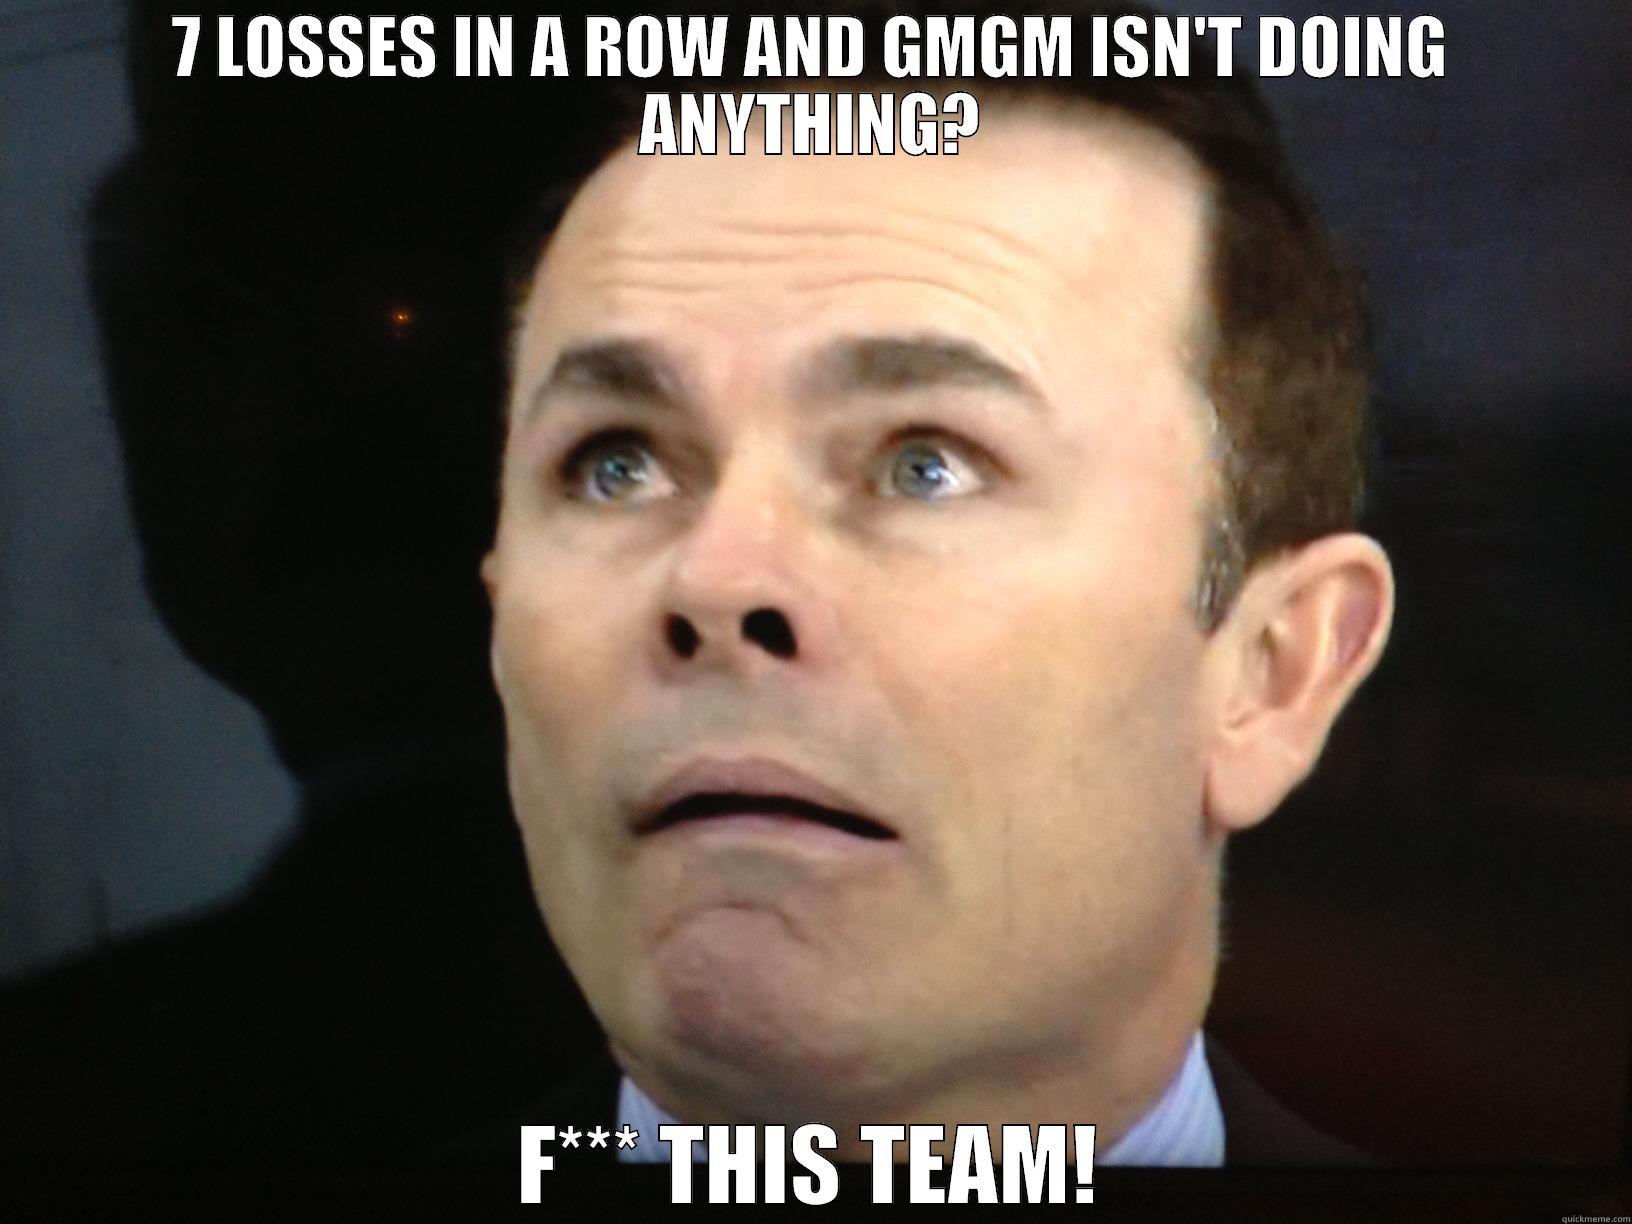 7 LOSSES IN A ROW AND GMGM ISN'T DOING ANYTHING? F*** THIS TEAM! Misc